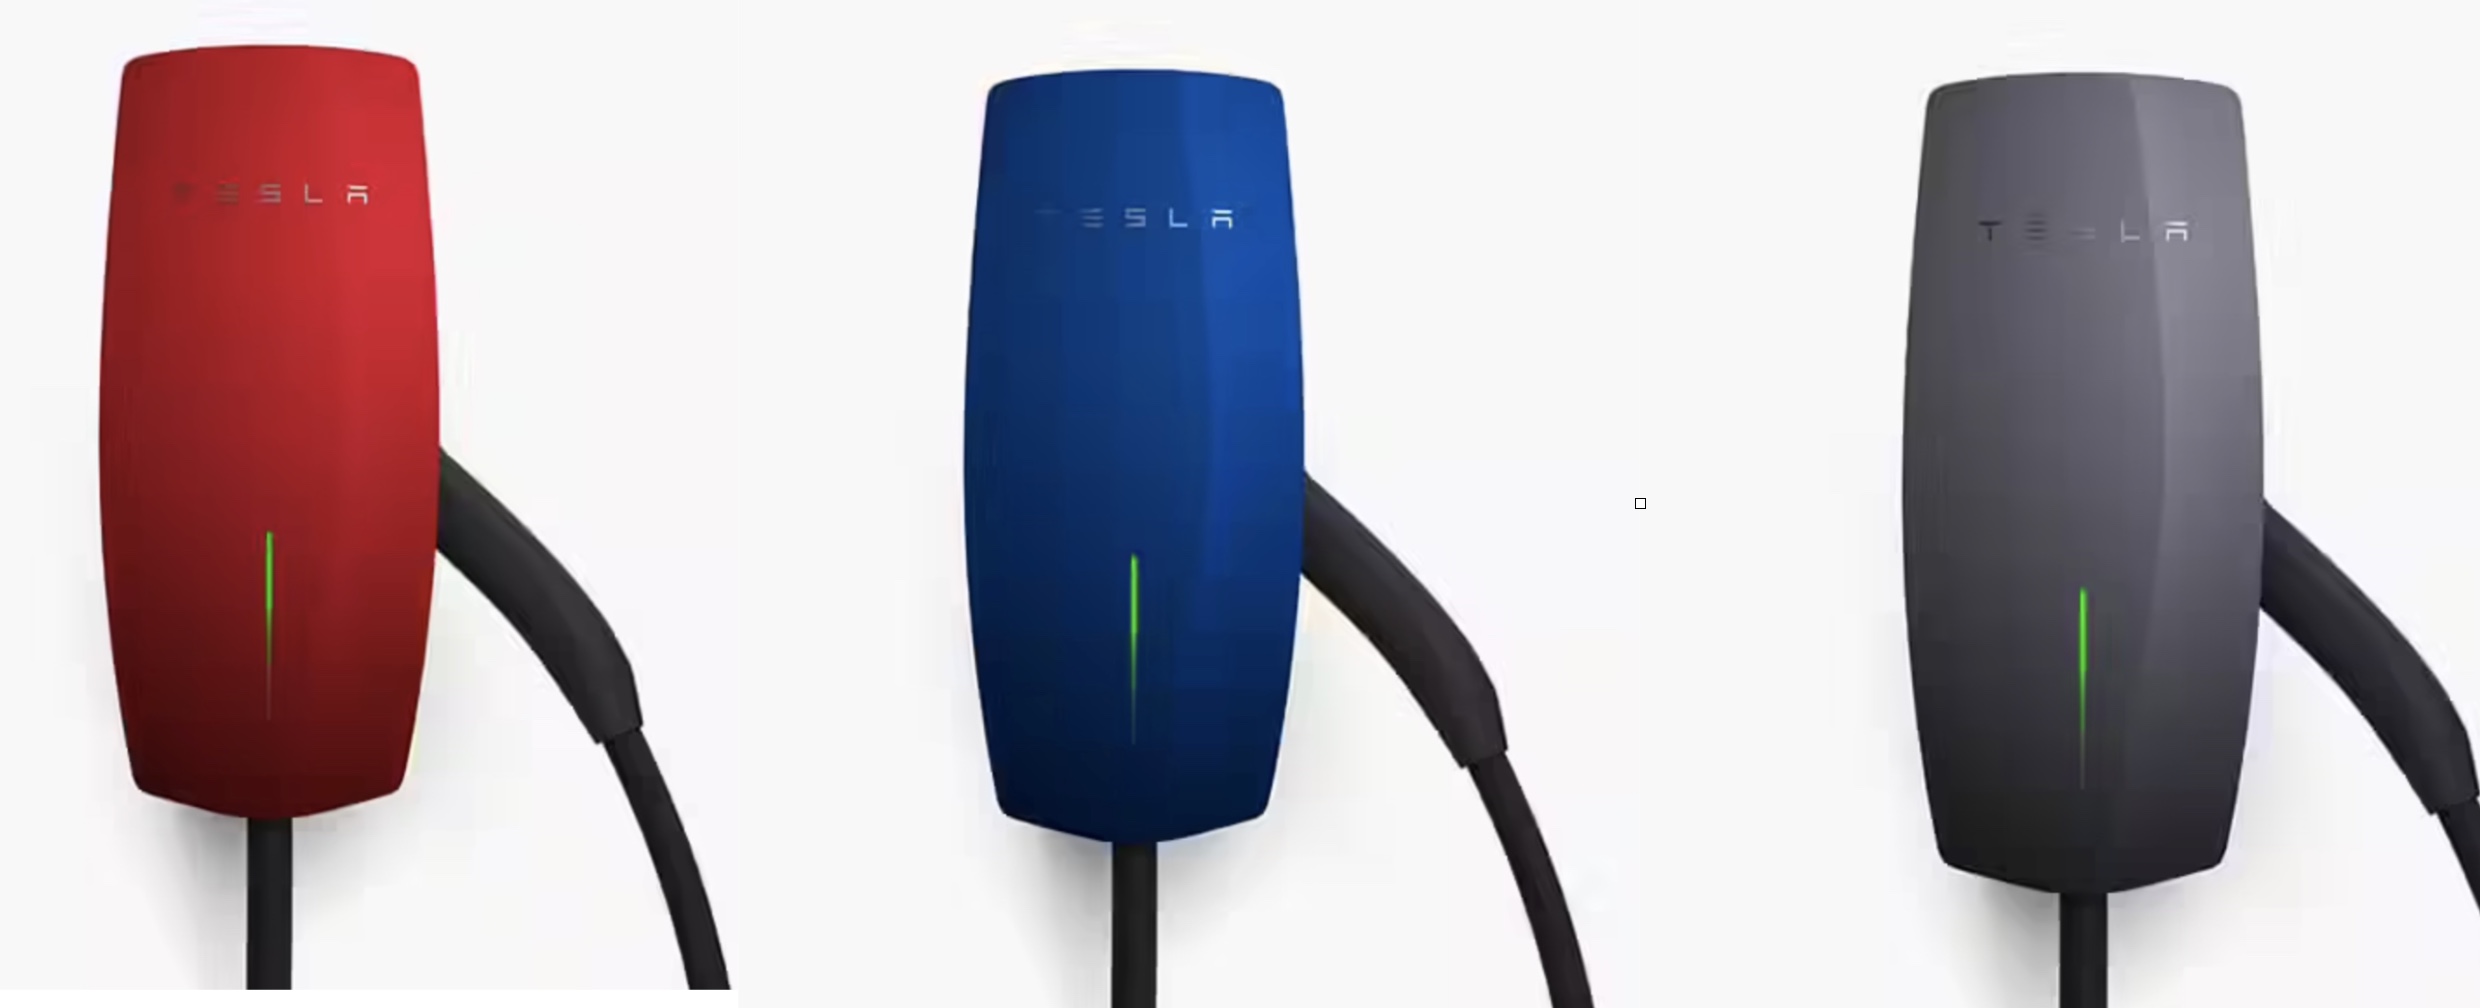 Tesla releases new charger faceplates that matches car colors